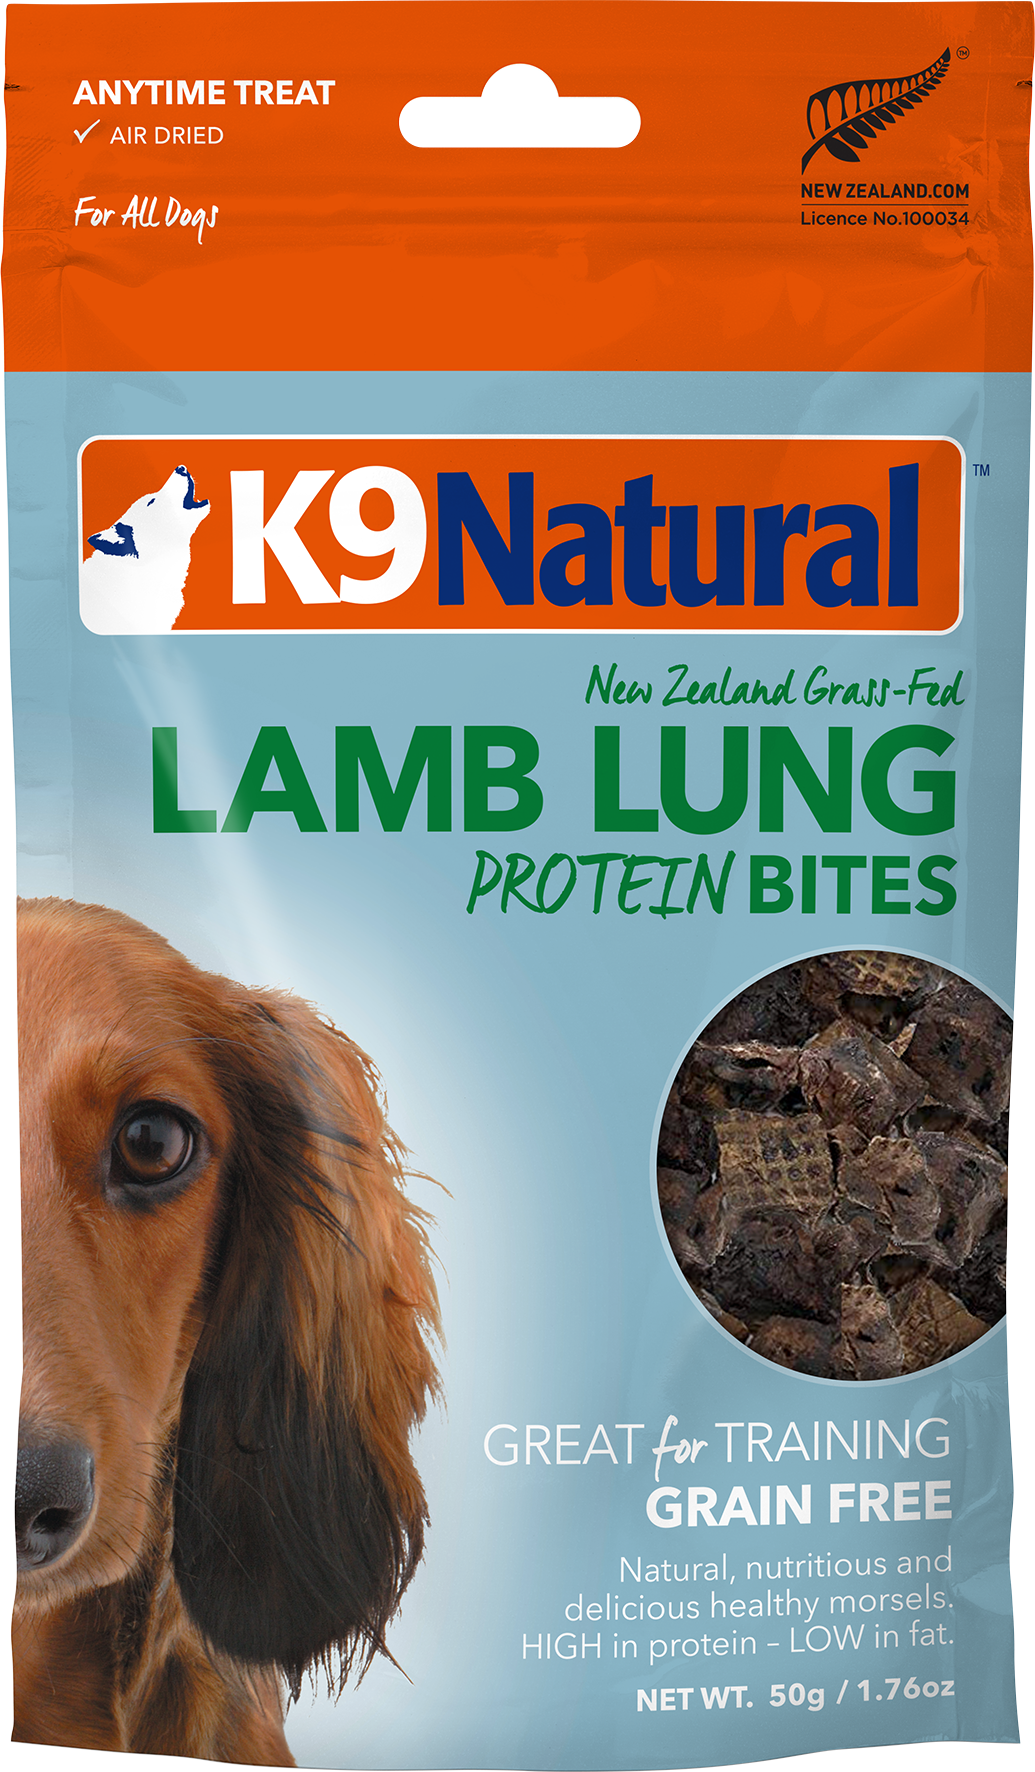 K9 Natural Air Dried Protein Bites - Lamb Lung